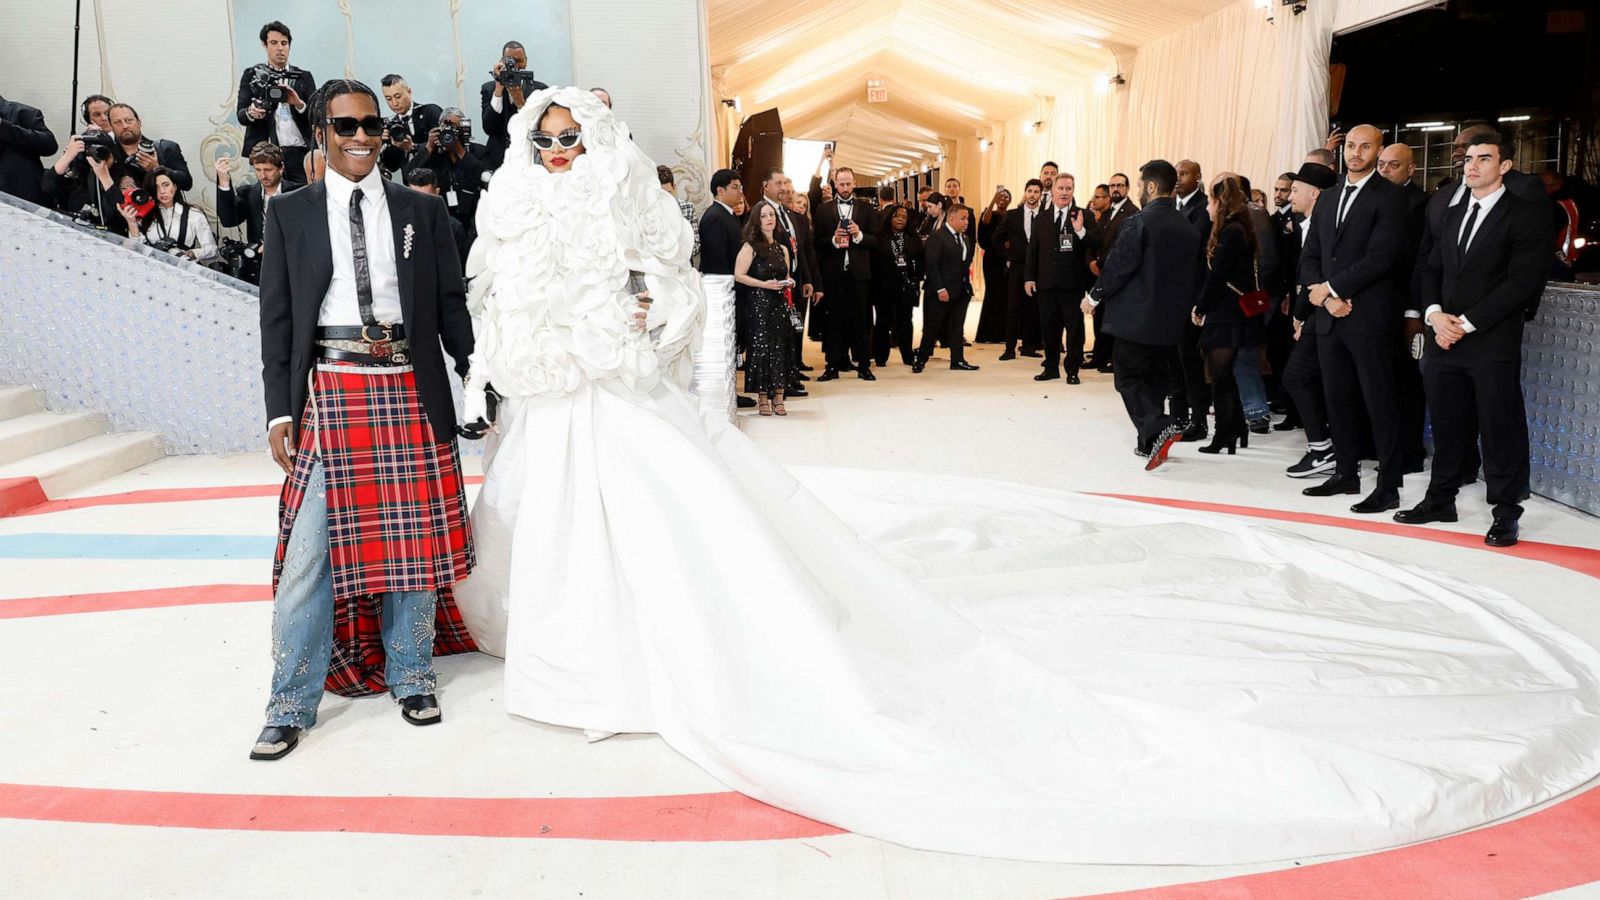 Rihanna and A$AP Rocky Welcome Their First Child - Fashion Meets Music -  Fashion, Music, Entertainment, Culture